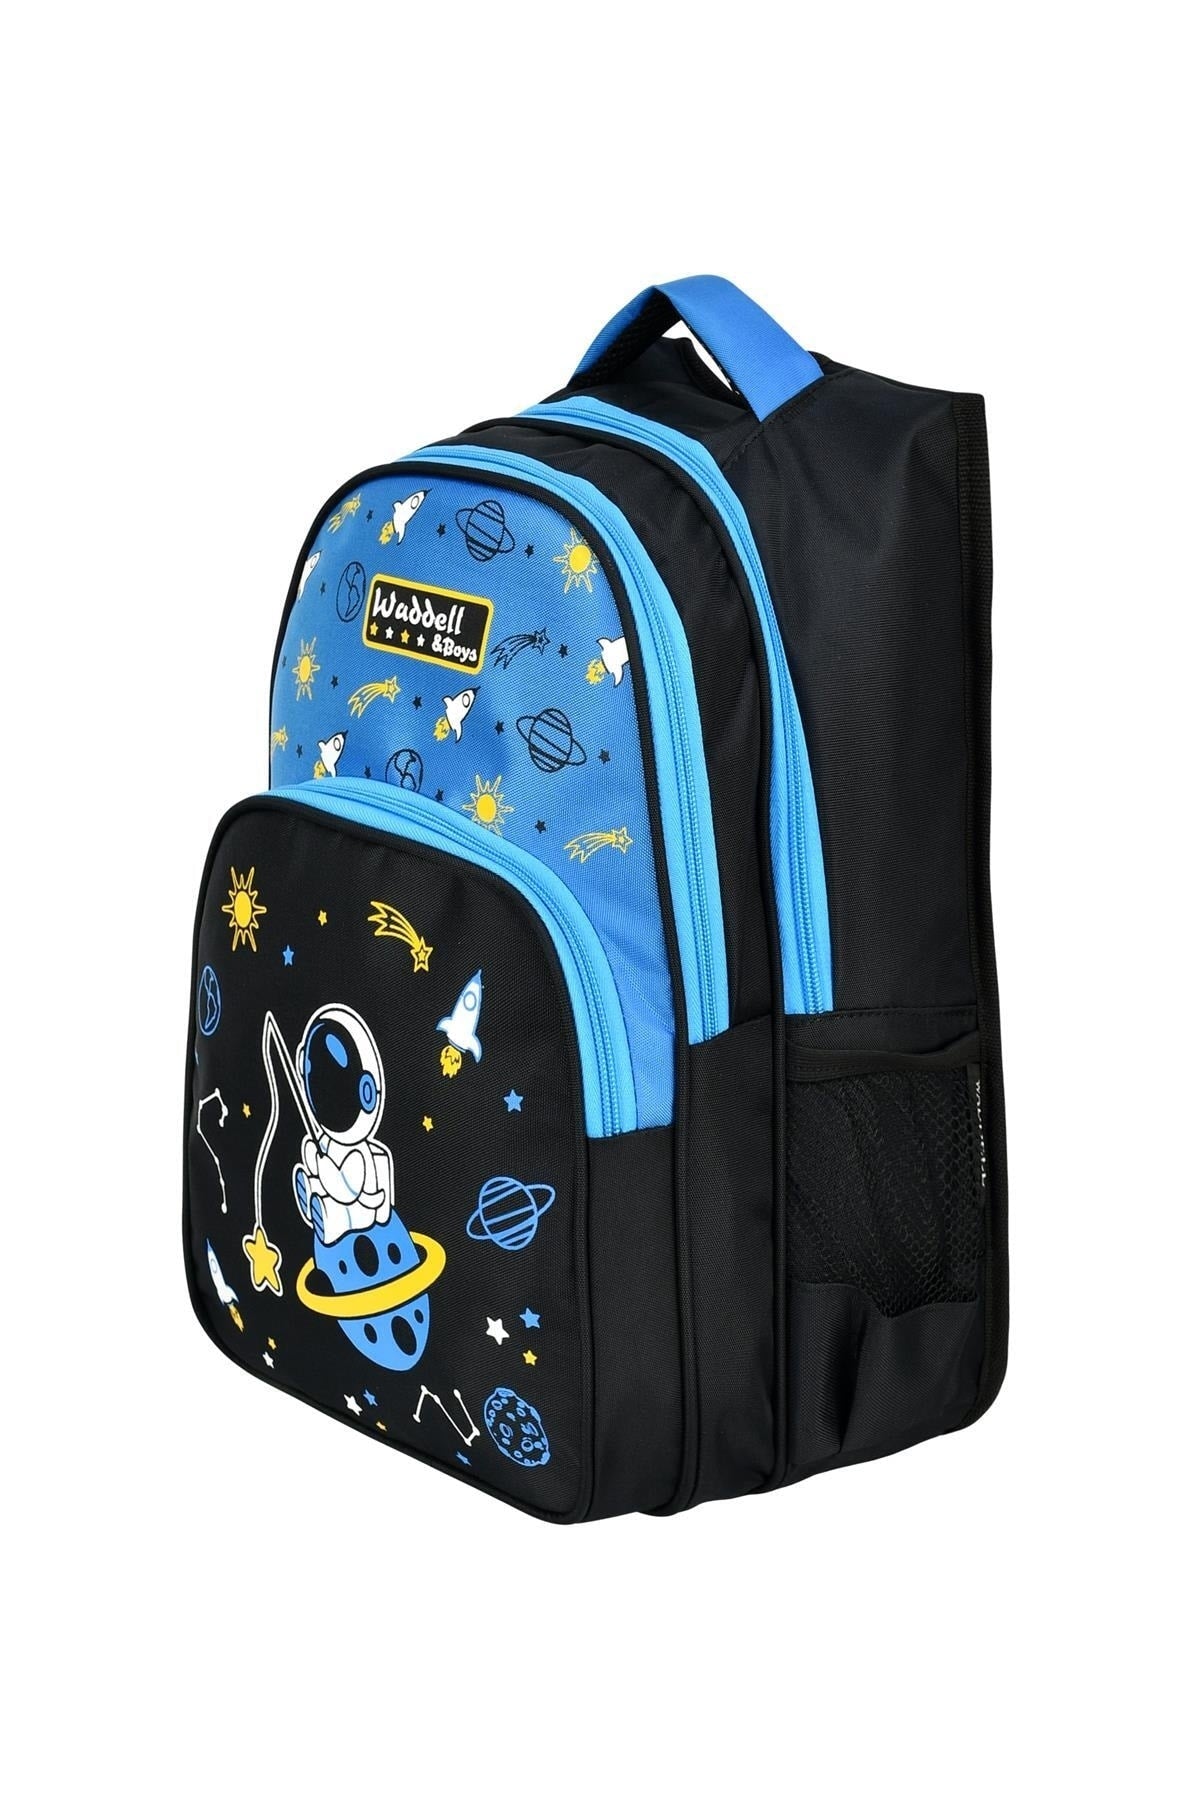 Astronaut Primary School Bag With Lunch Box